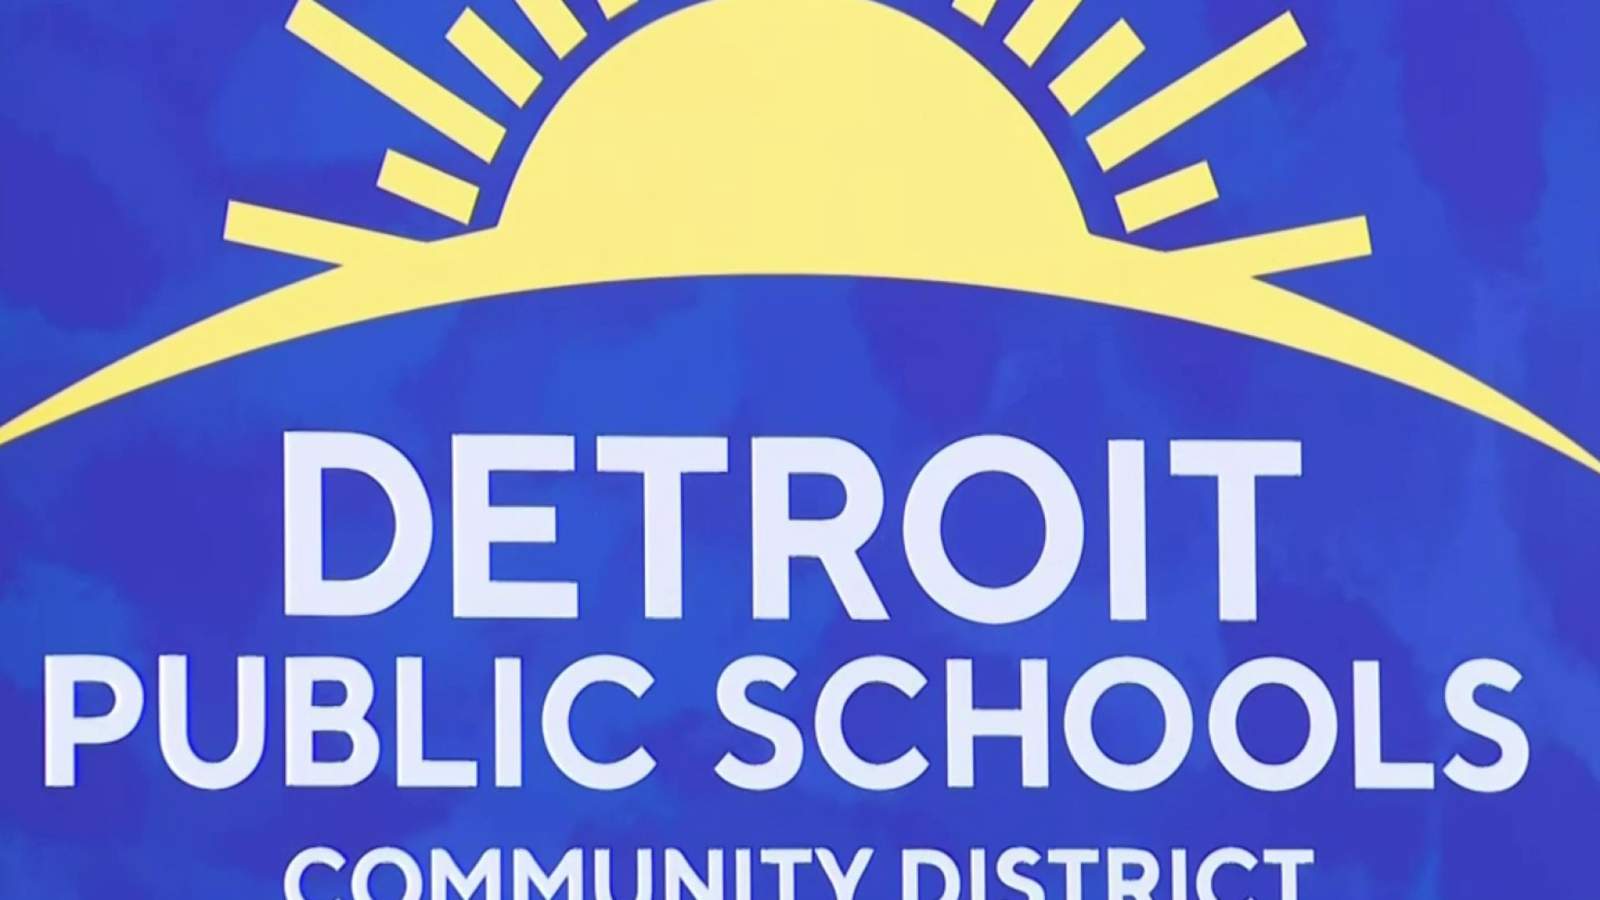 How Detroit Public Schools Community District plans to help families after switching to all-remote learning